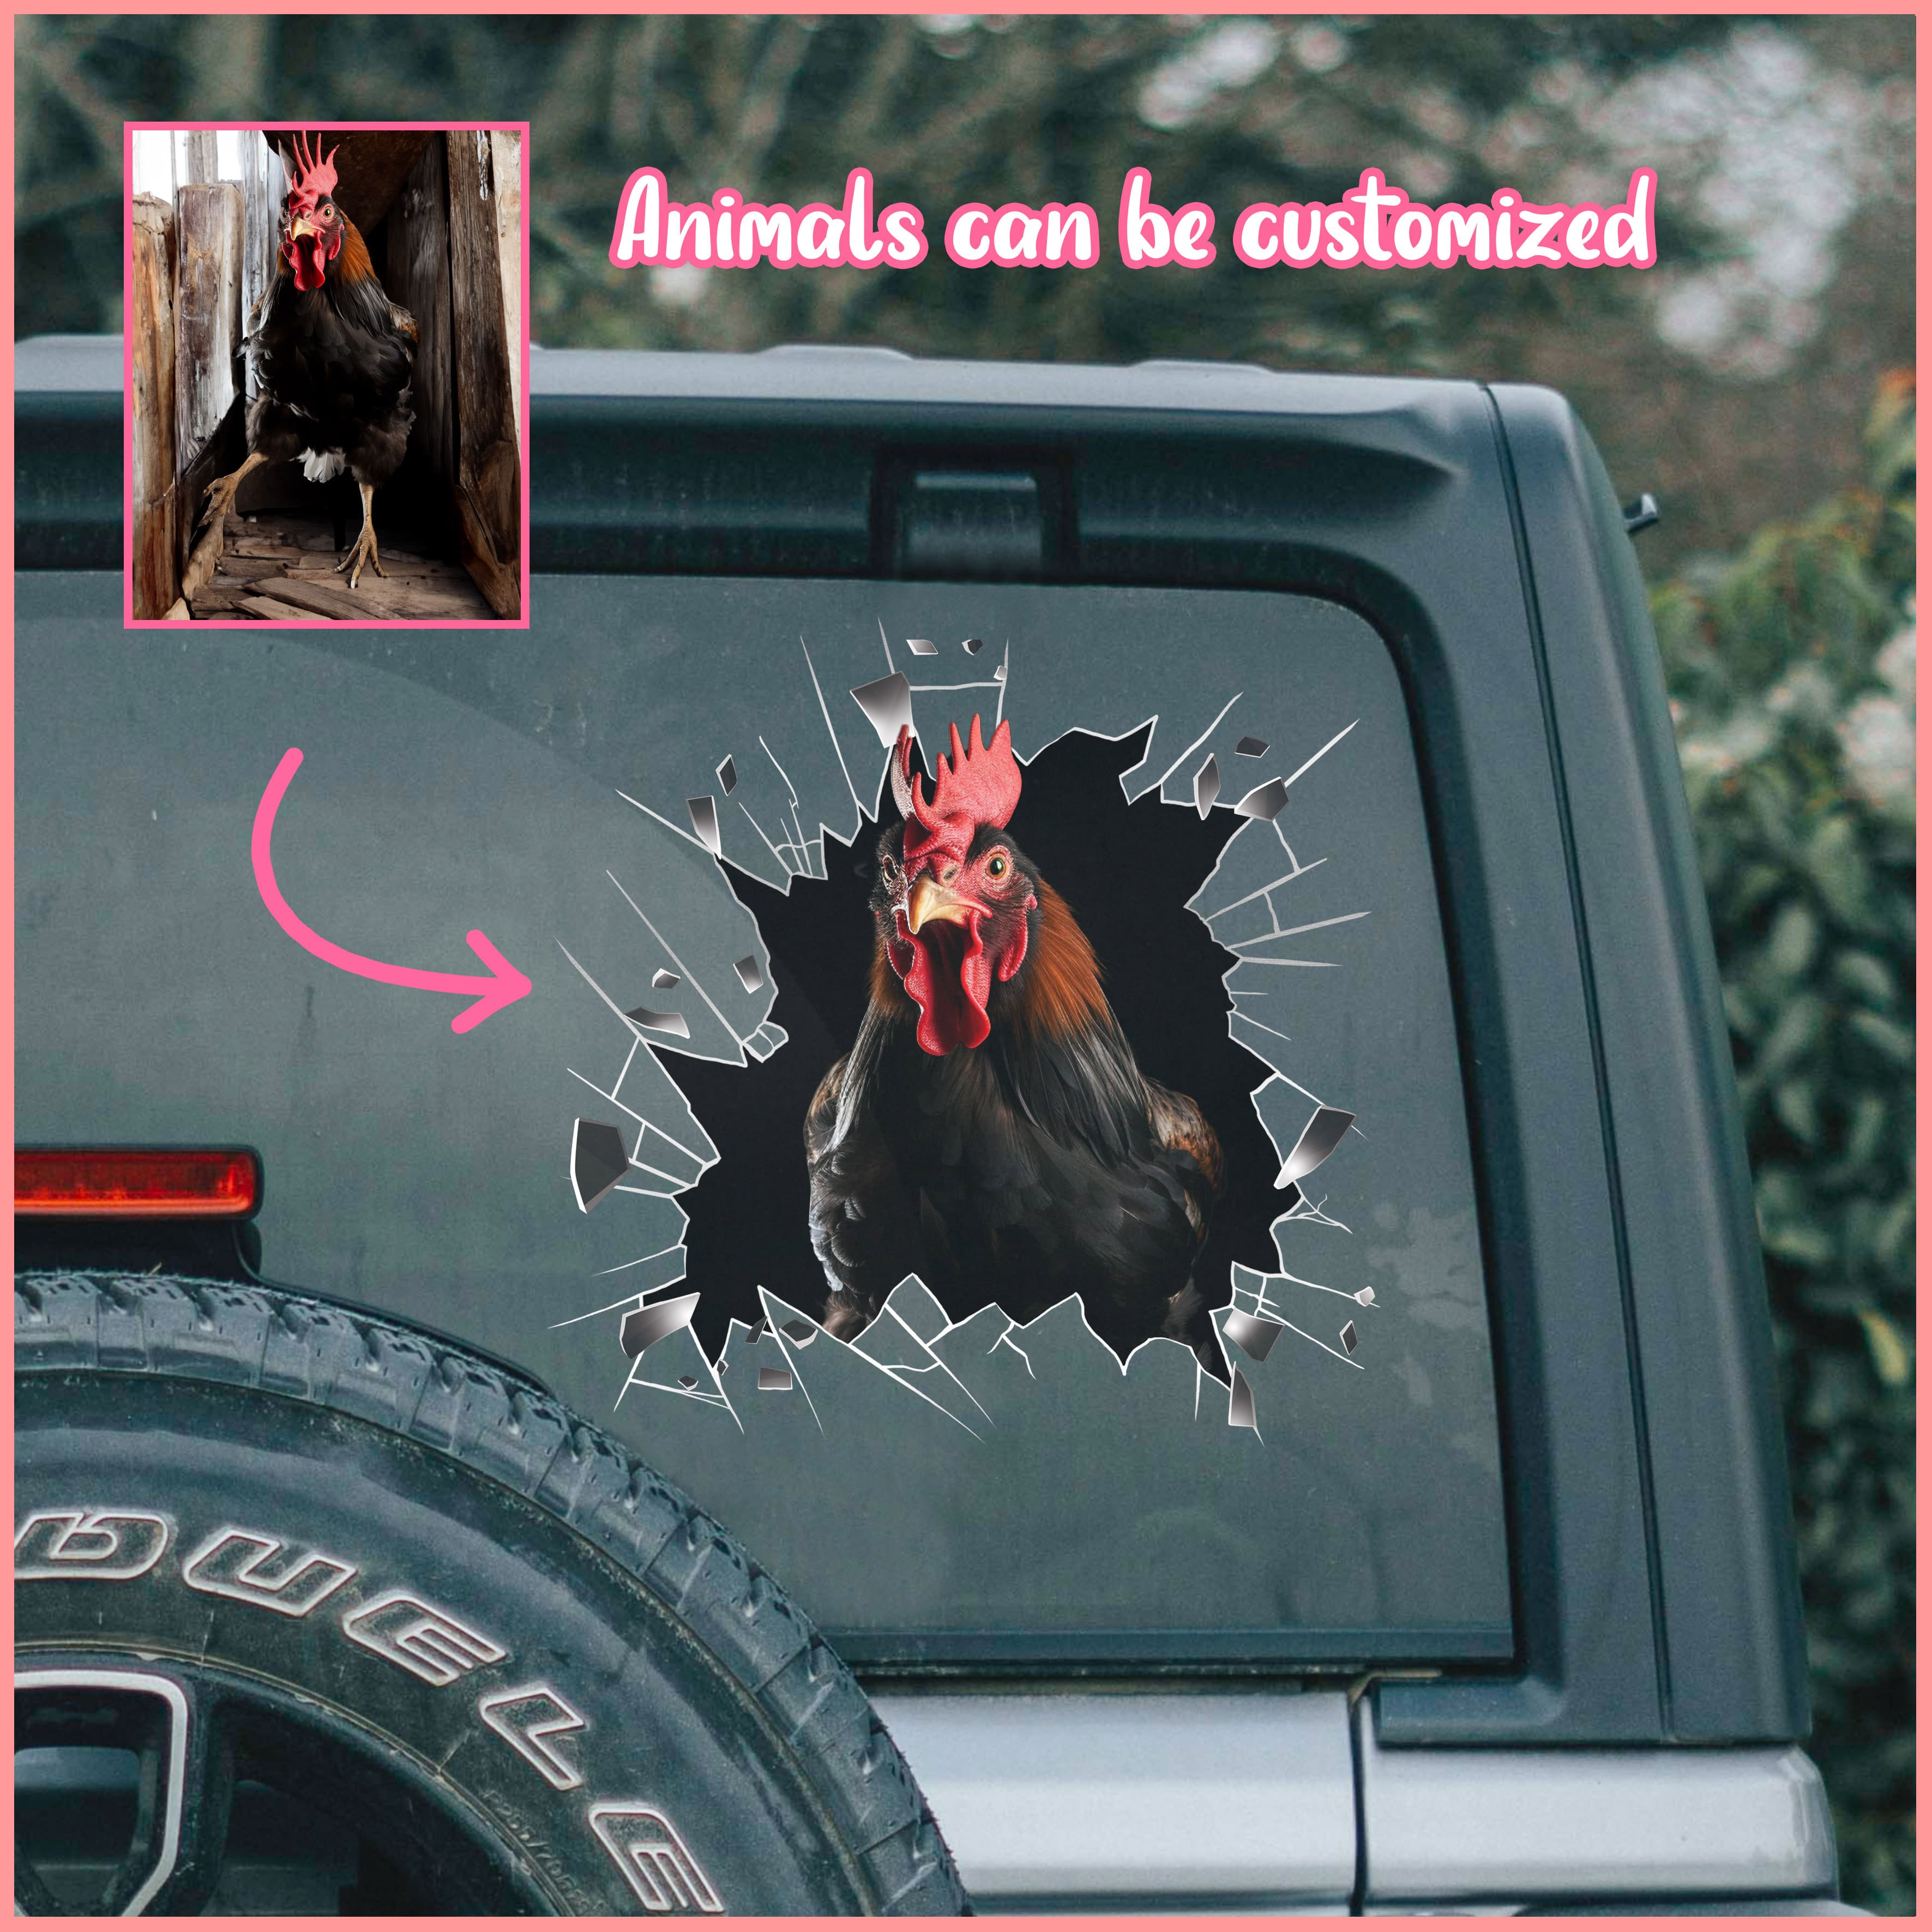 Chicken car decal, Animals can be customized